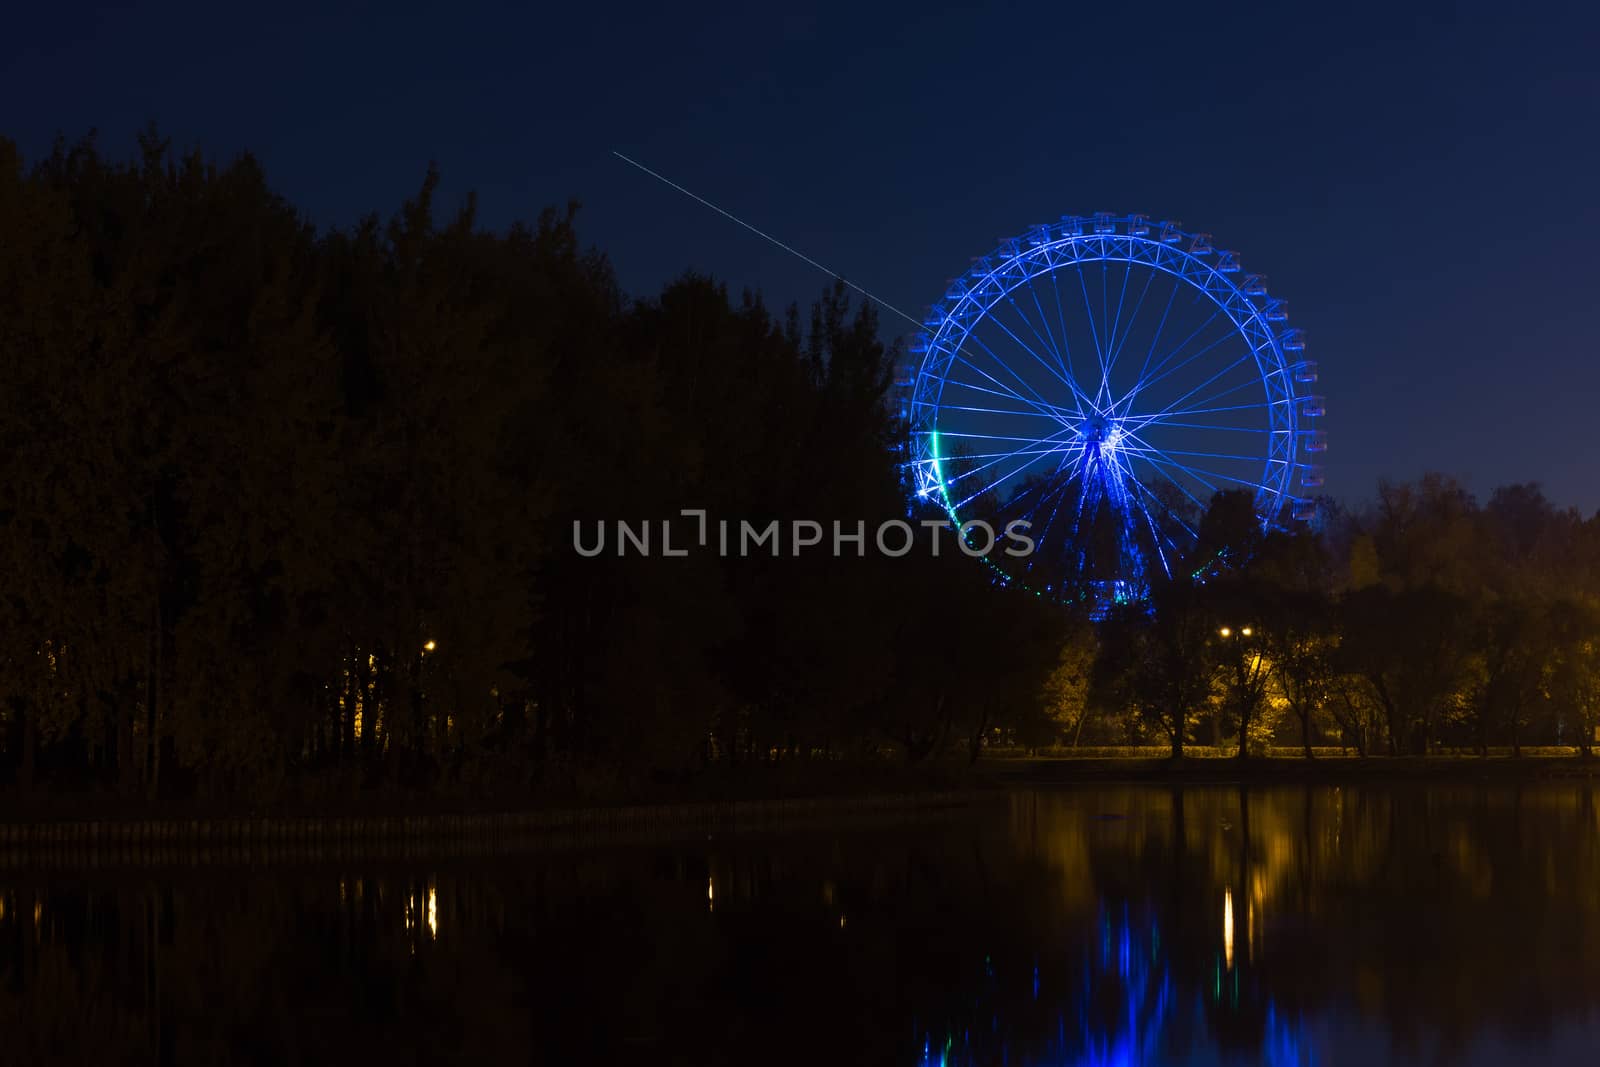 The picture shows a Ferris wheel